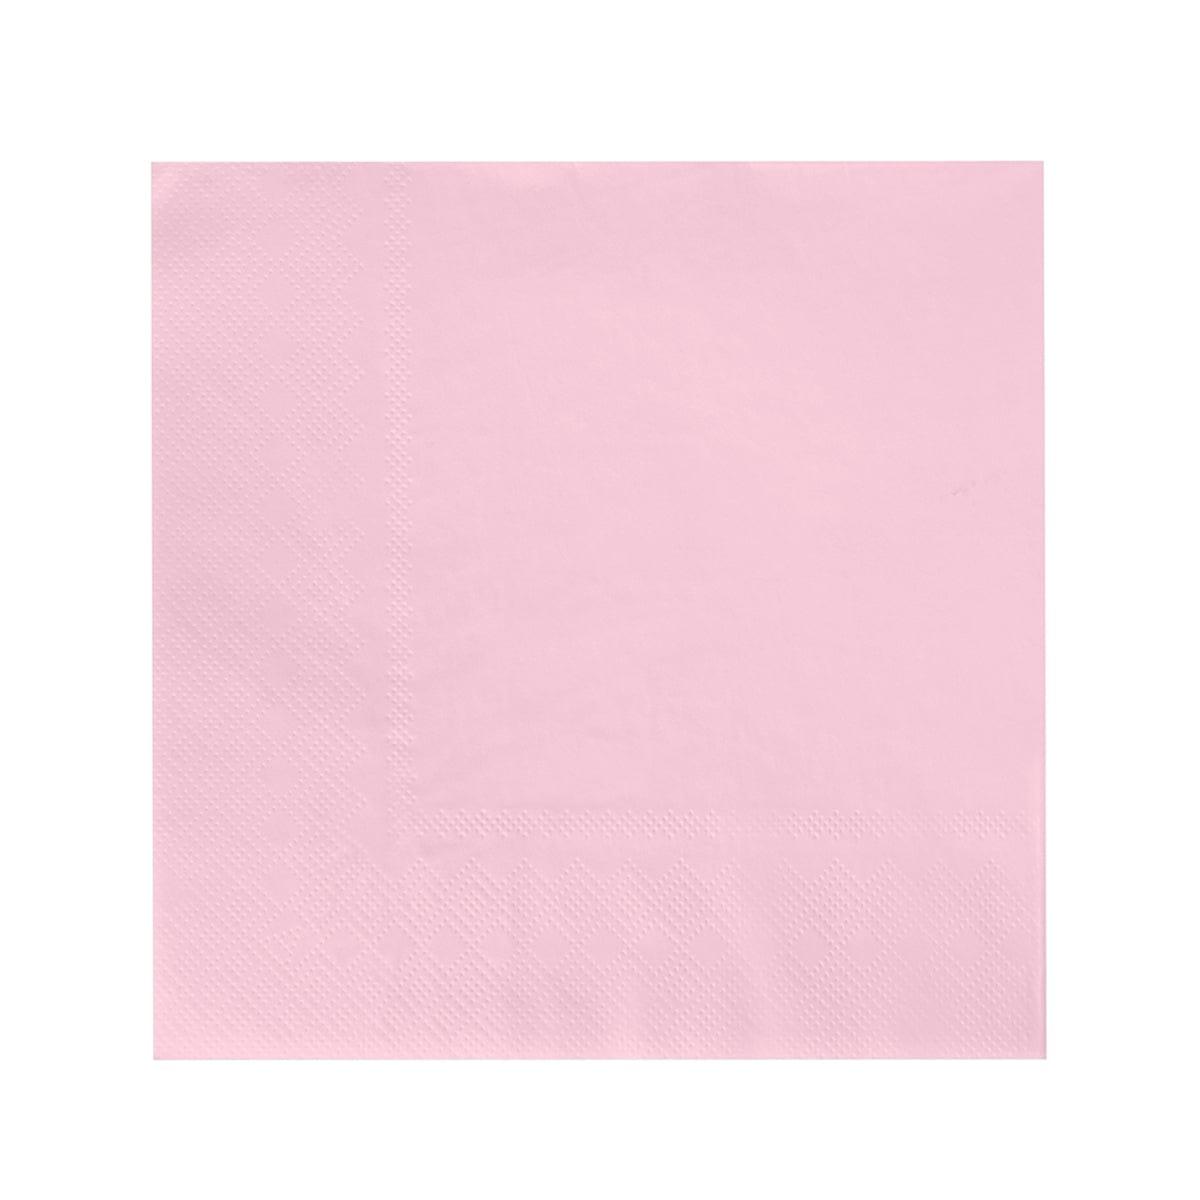 YIWU SANDY PAPER PRODUCTS CO., LTD Everyday Entertaining Light Pink Lunch Napkins, 16 Count